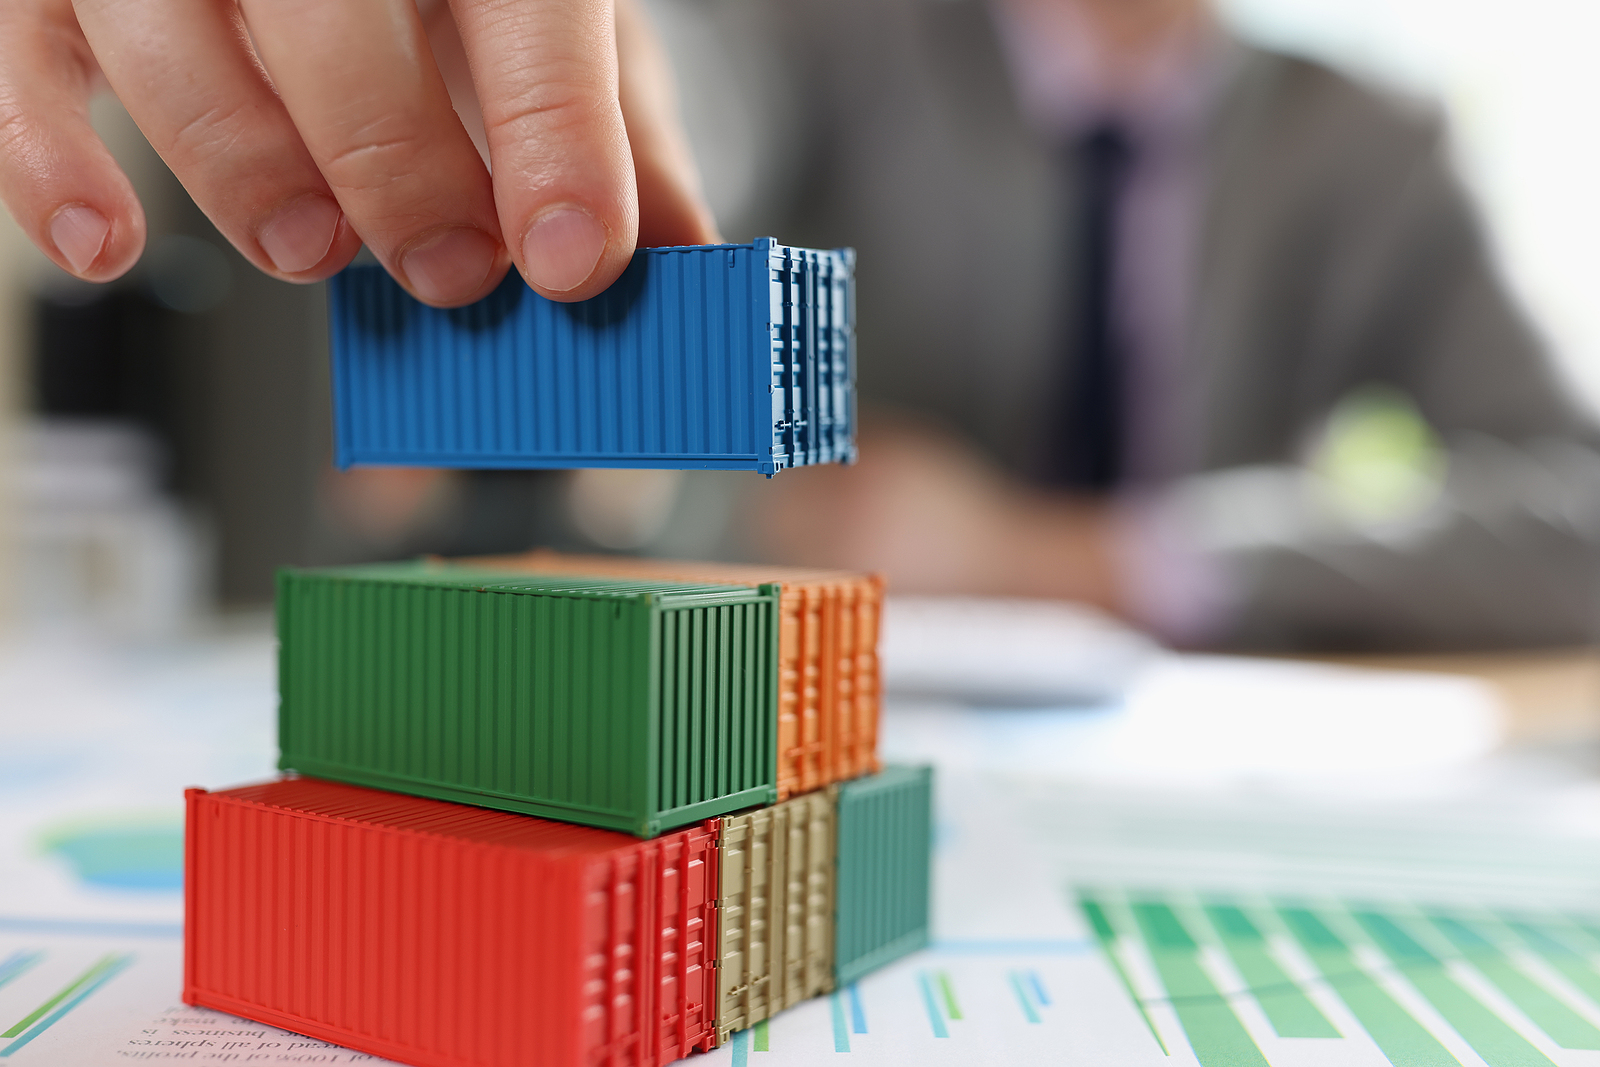 Man stacking cargo containers on financial report papers, symbolizing global logistics and trade.